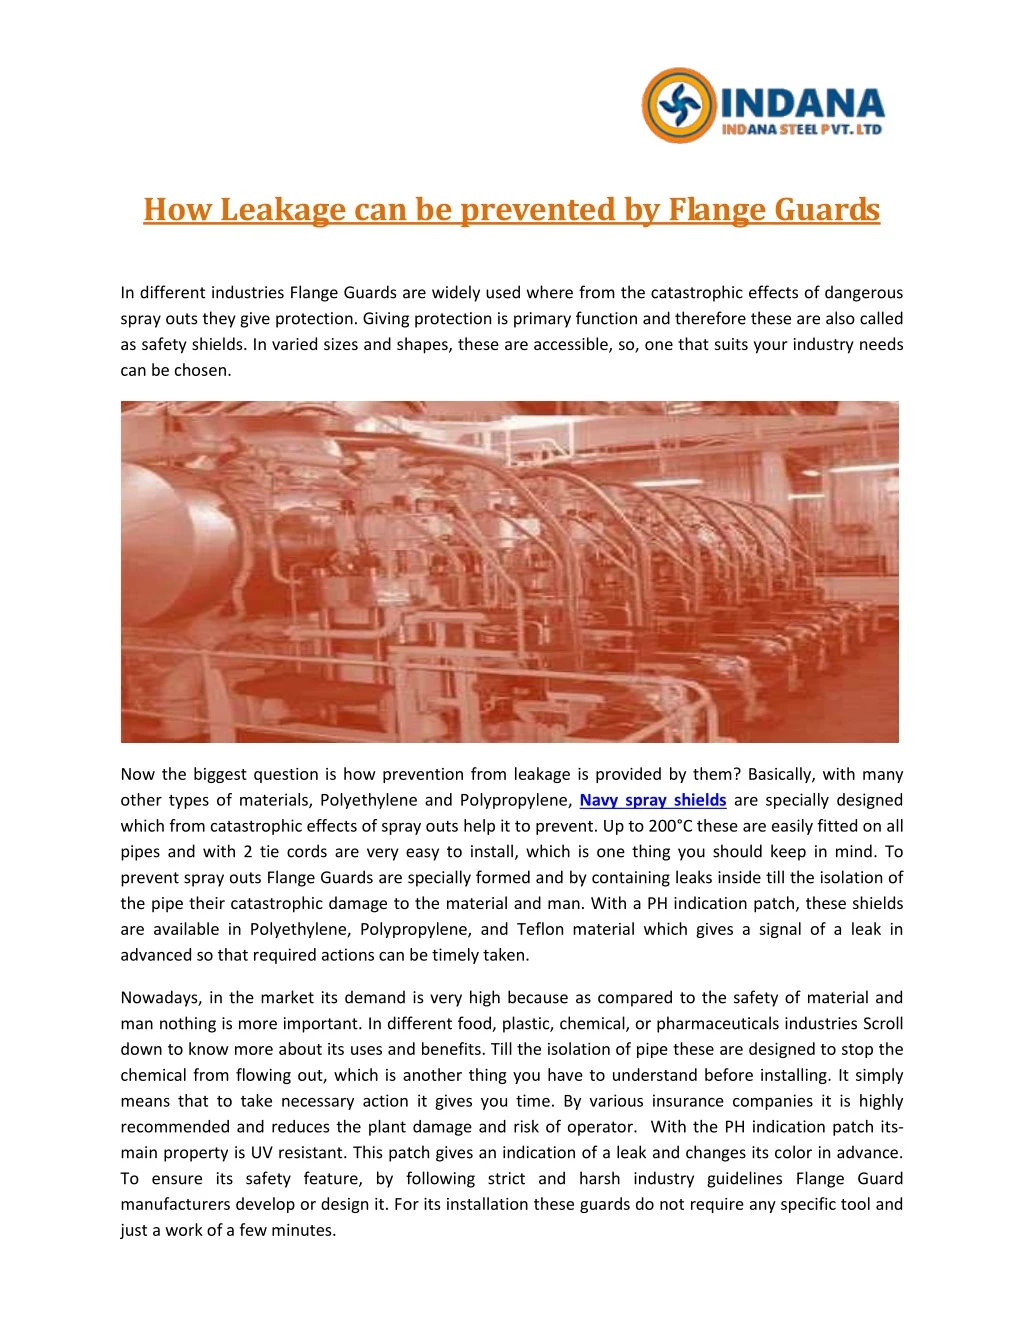 how leakage can be prevented by flange guards